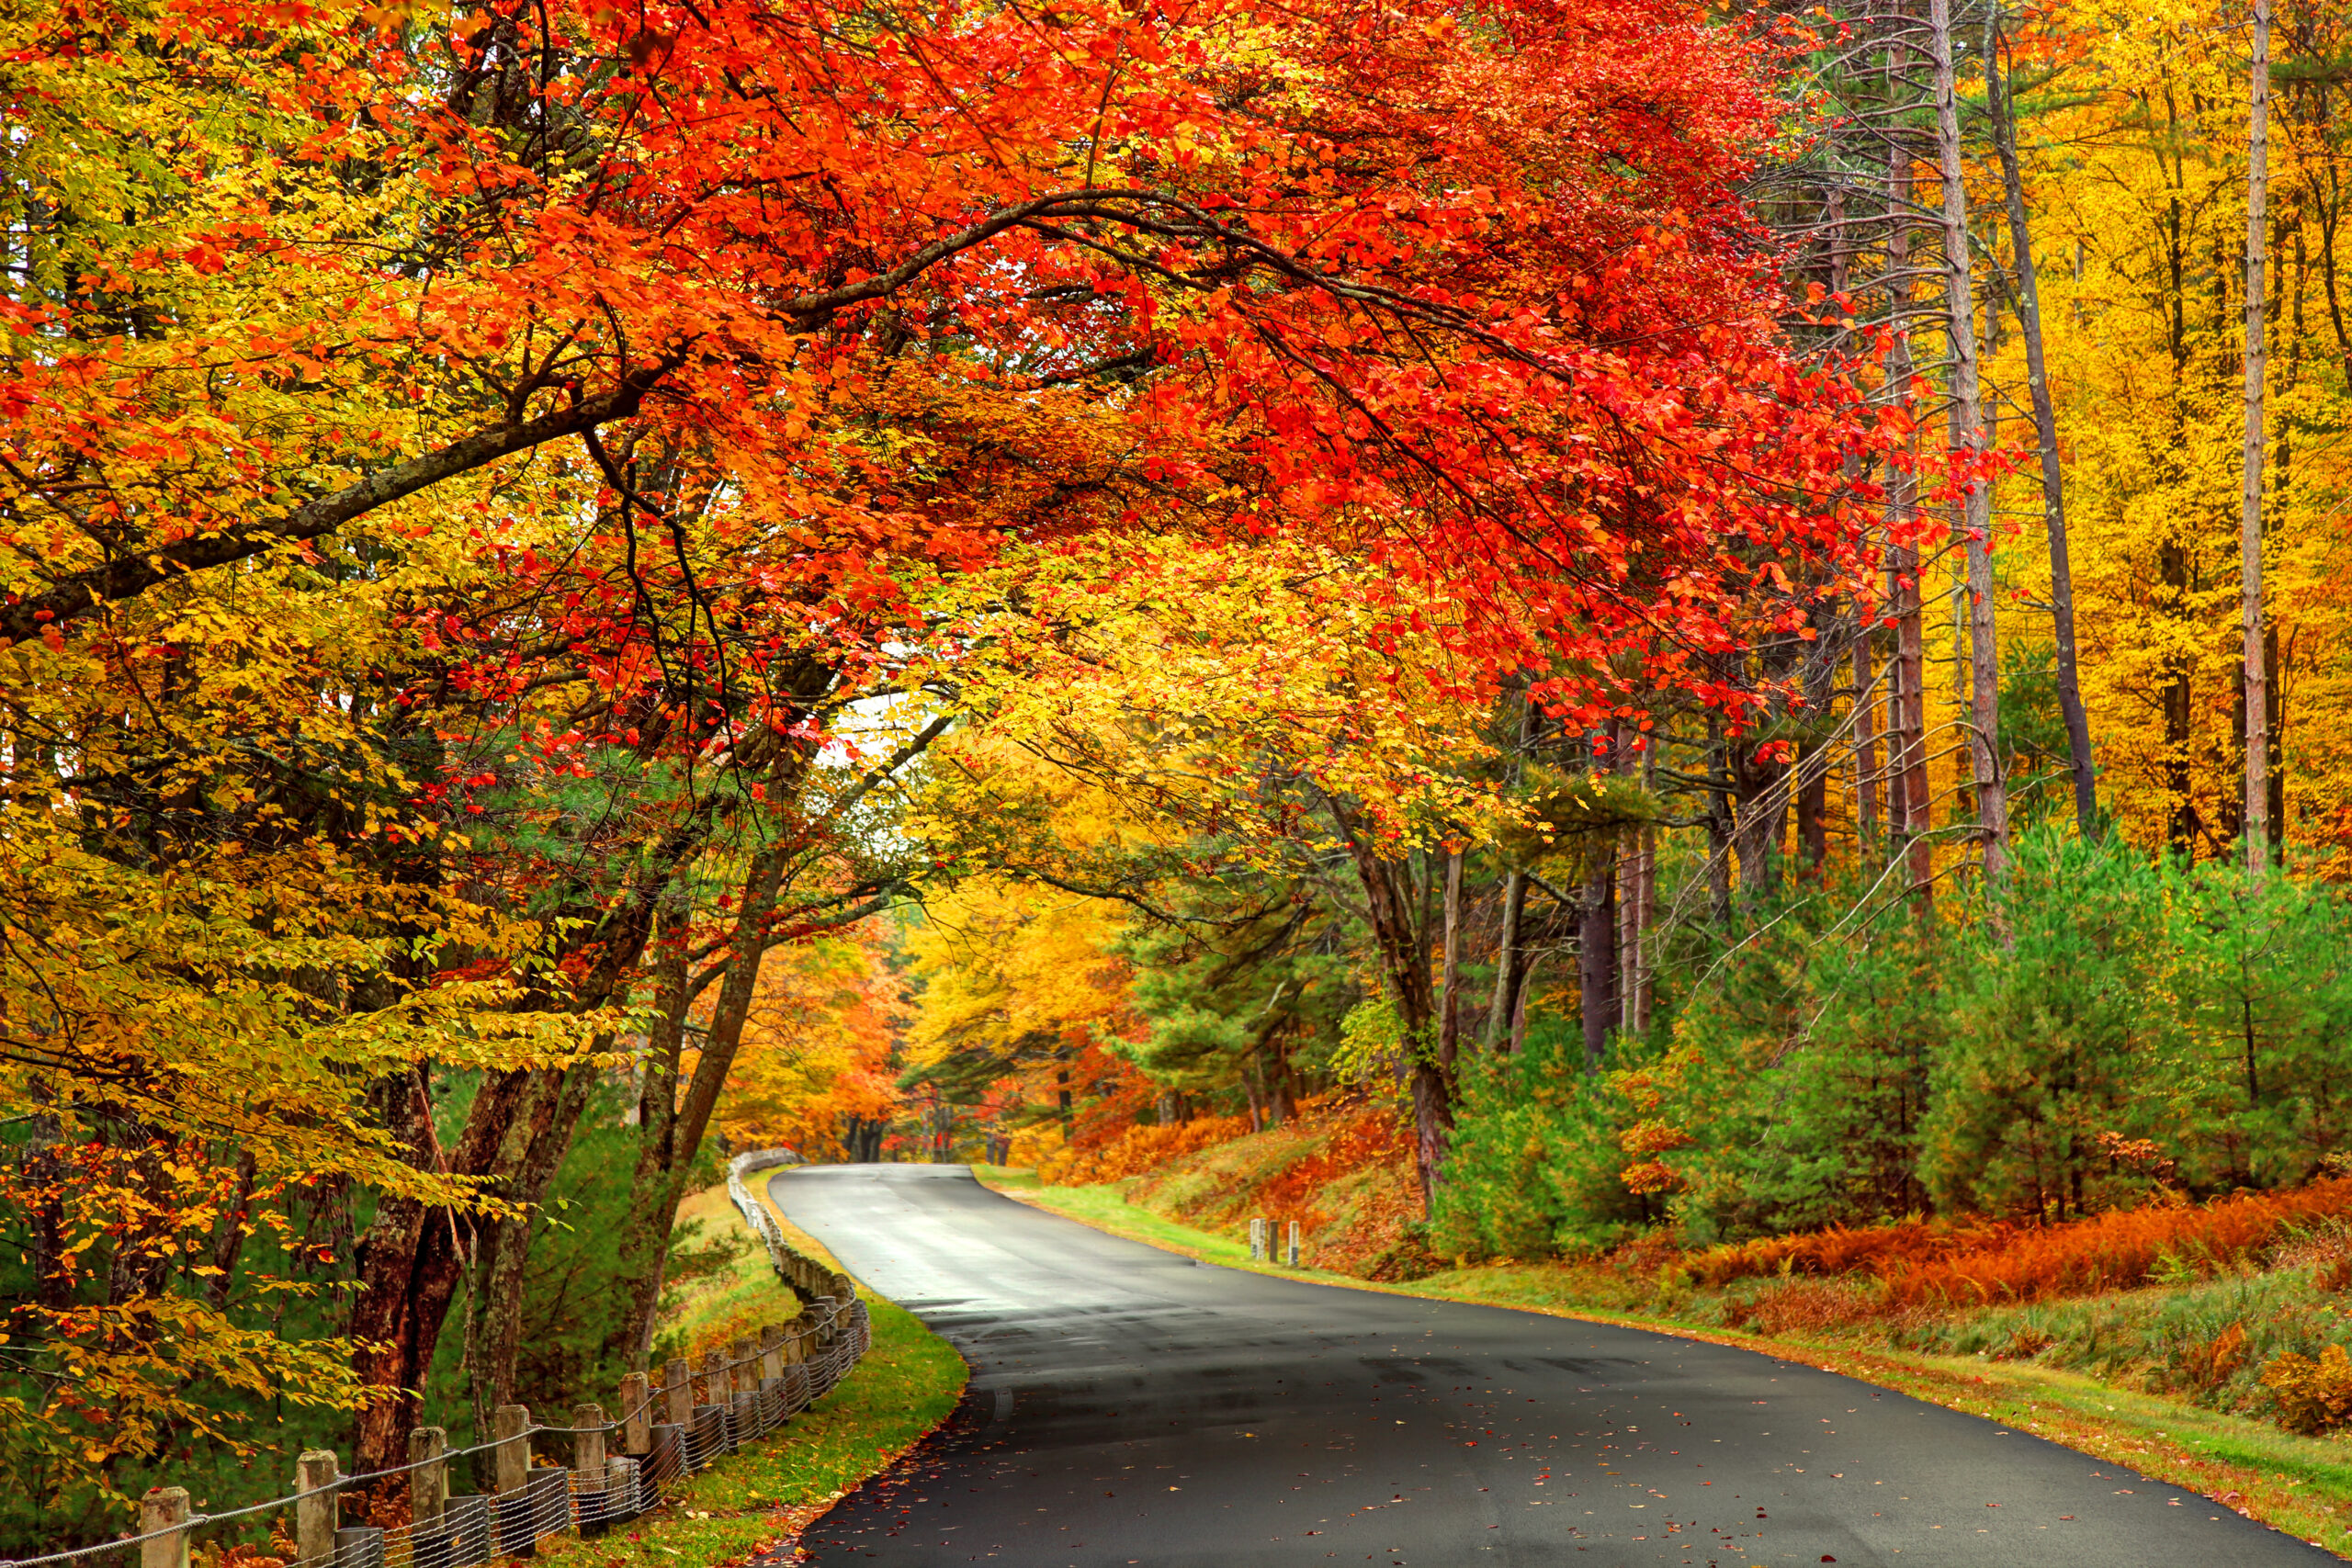 6 Scenic Road Trips to See Colorful Fall Foliage